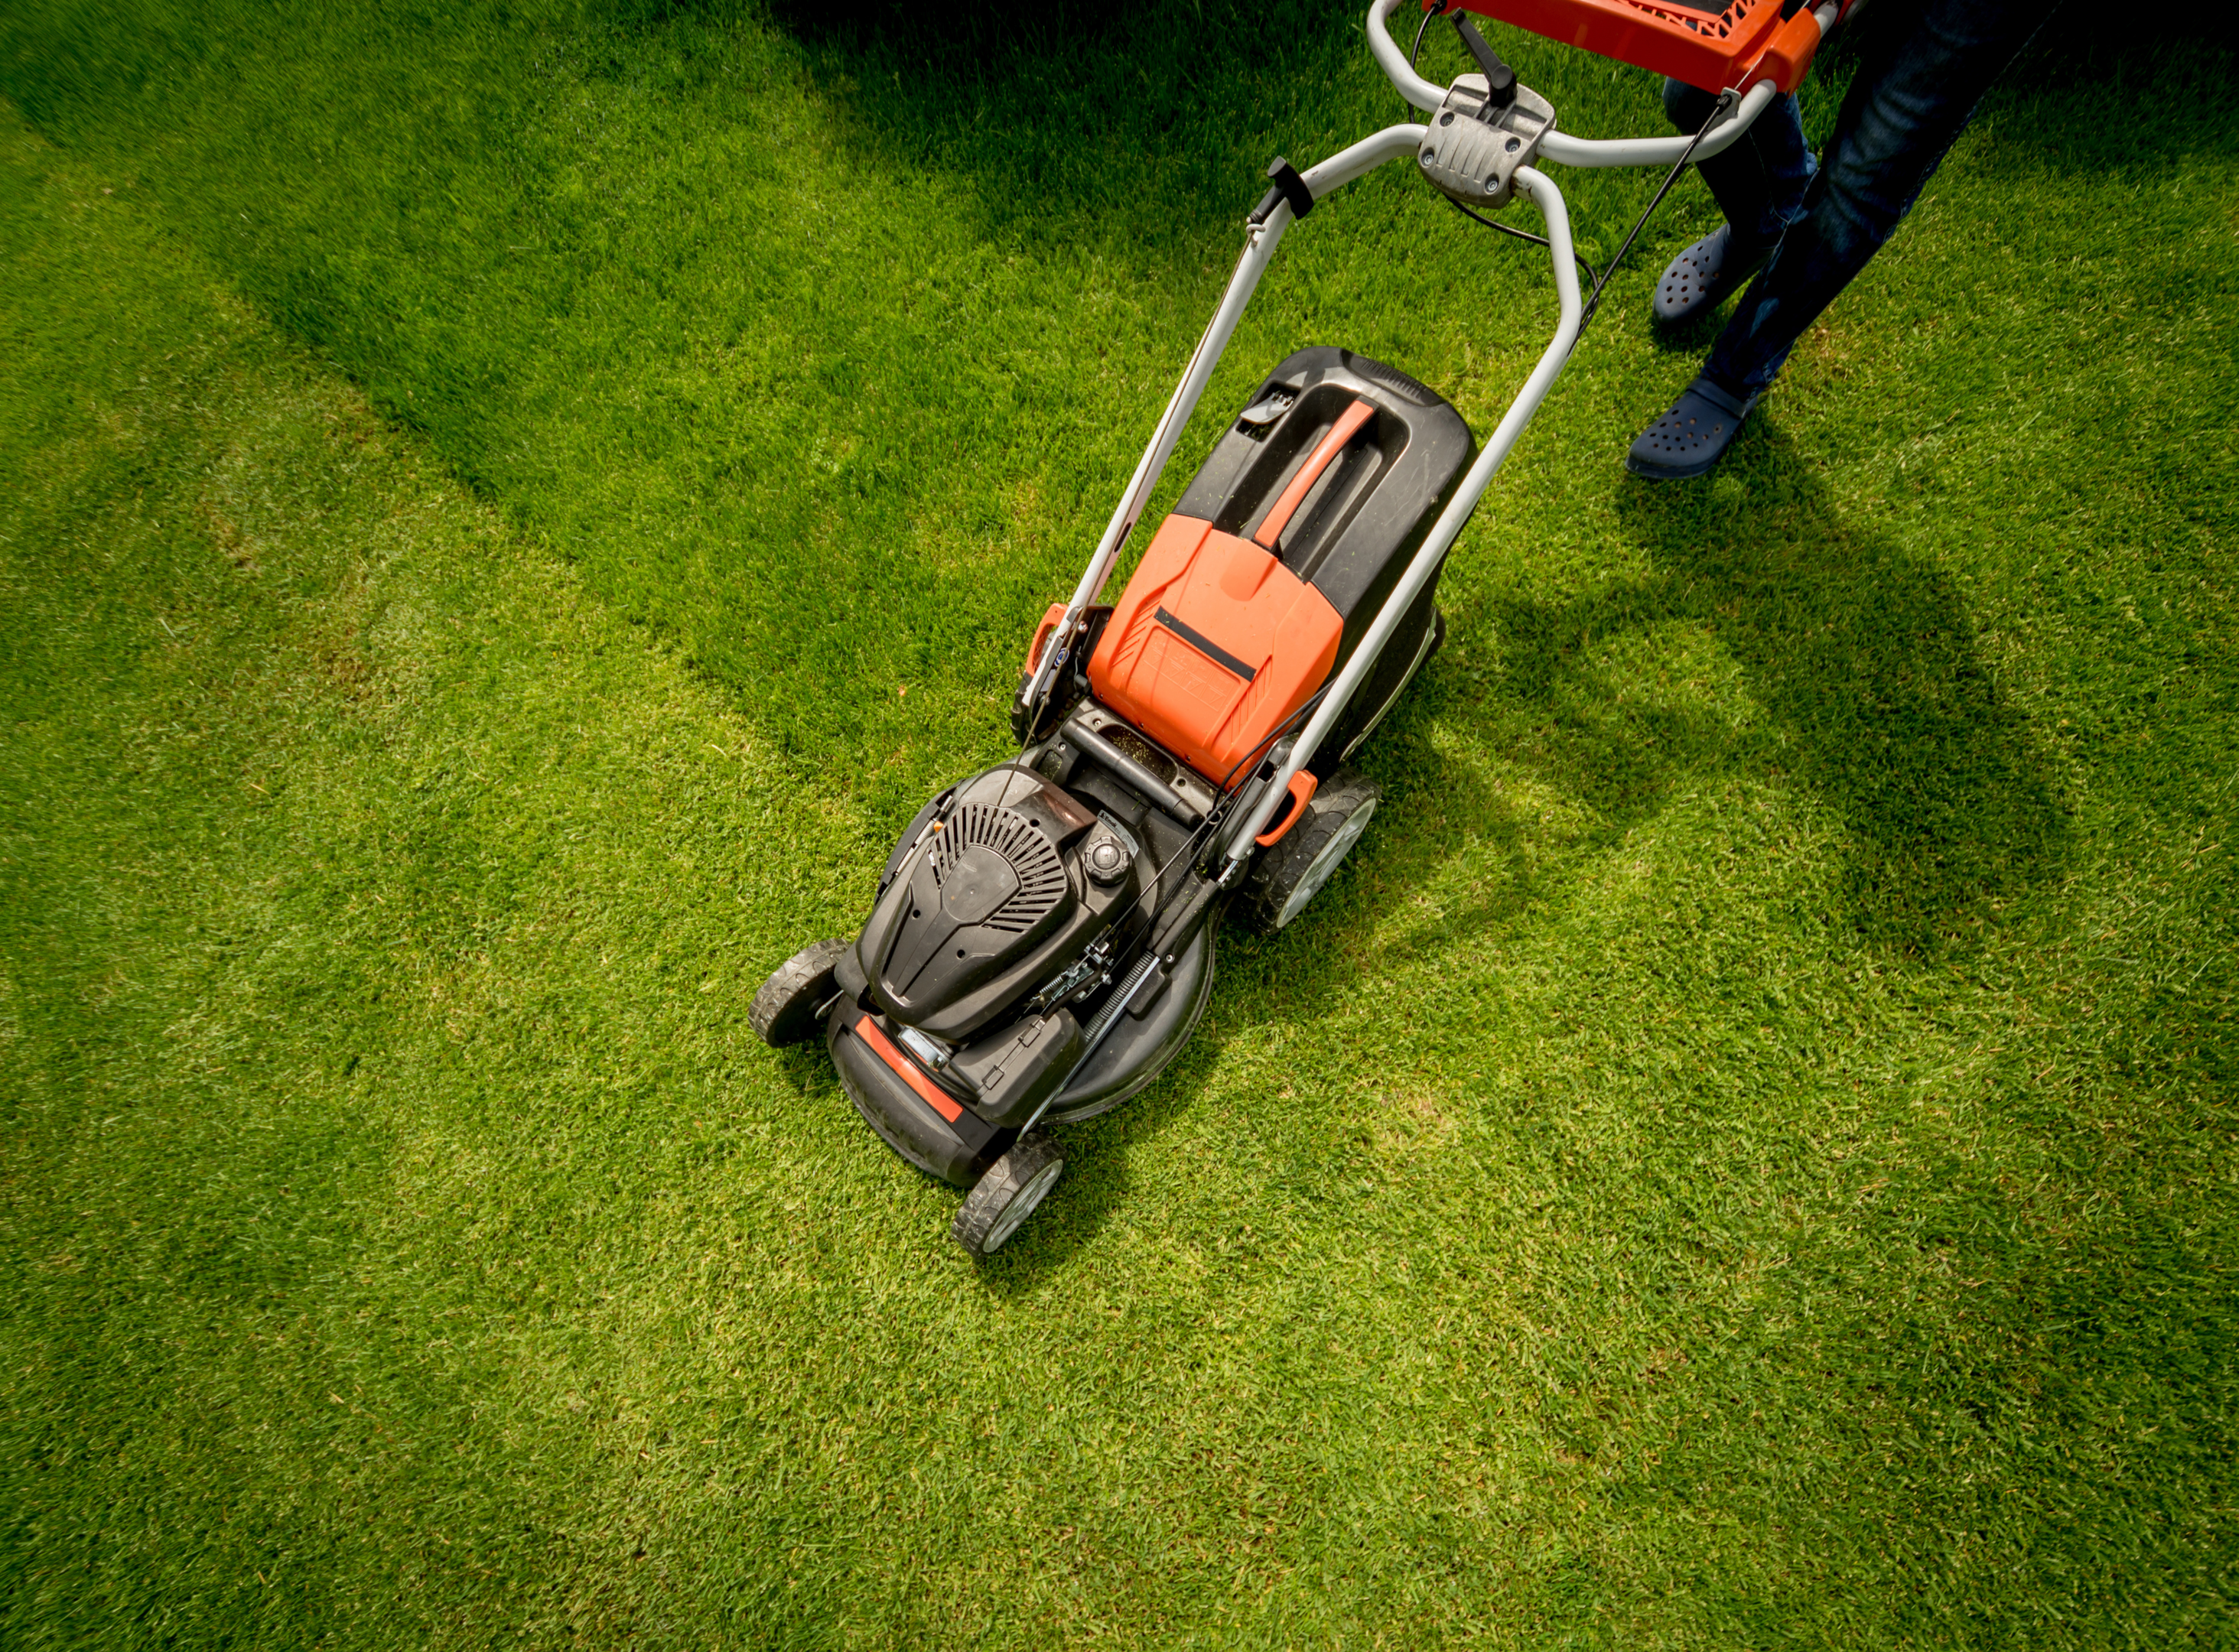 Own your own lawn care business